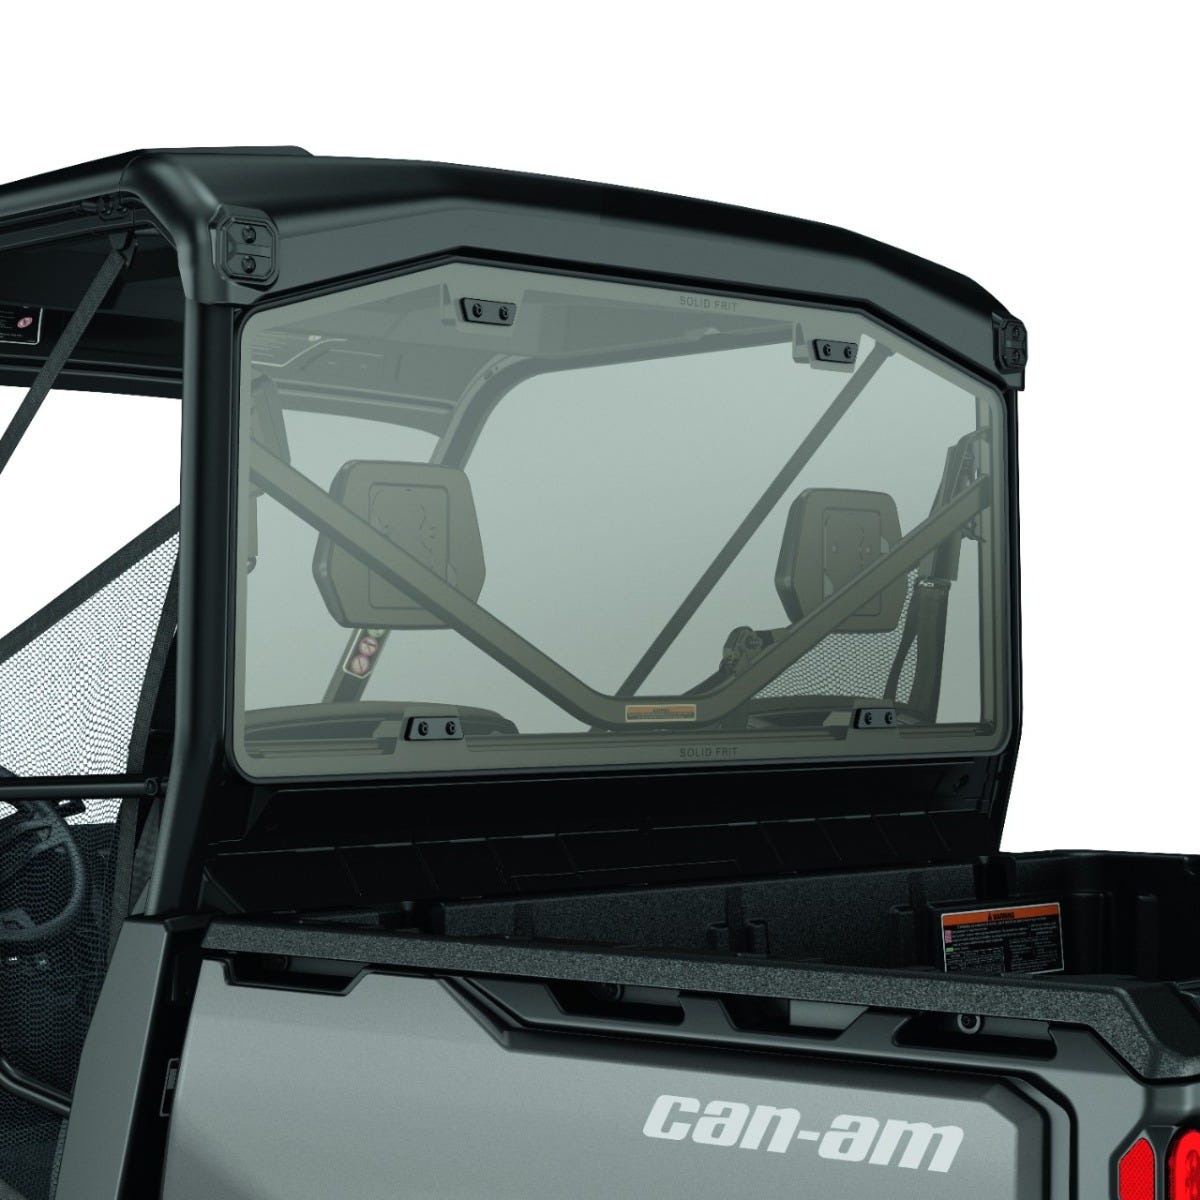 Can-am Rear Glass Window 715007079 - The Parts Lodge